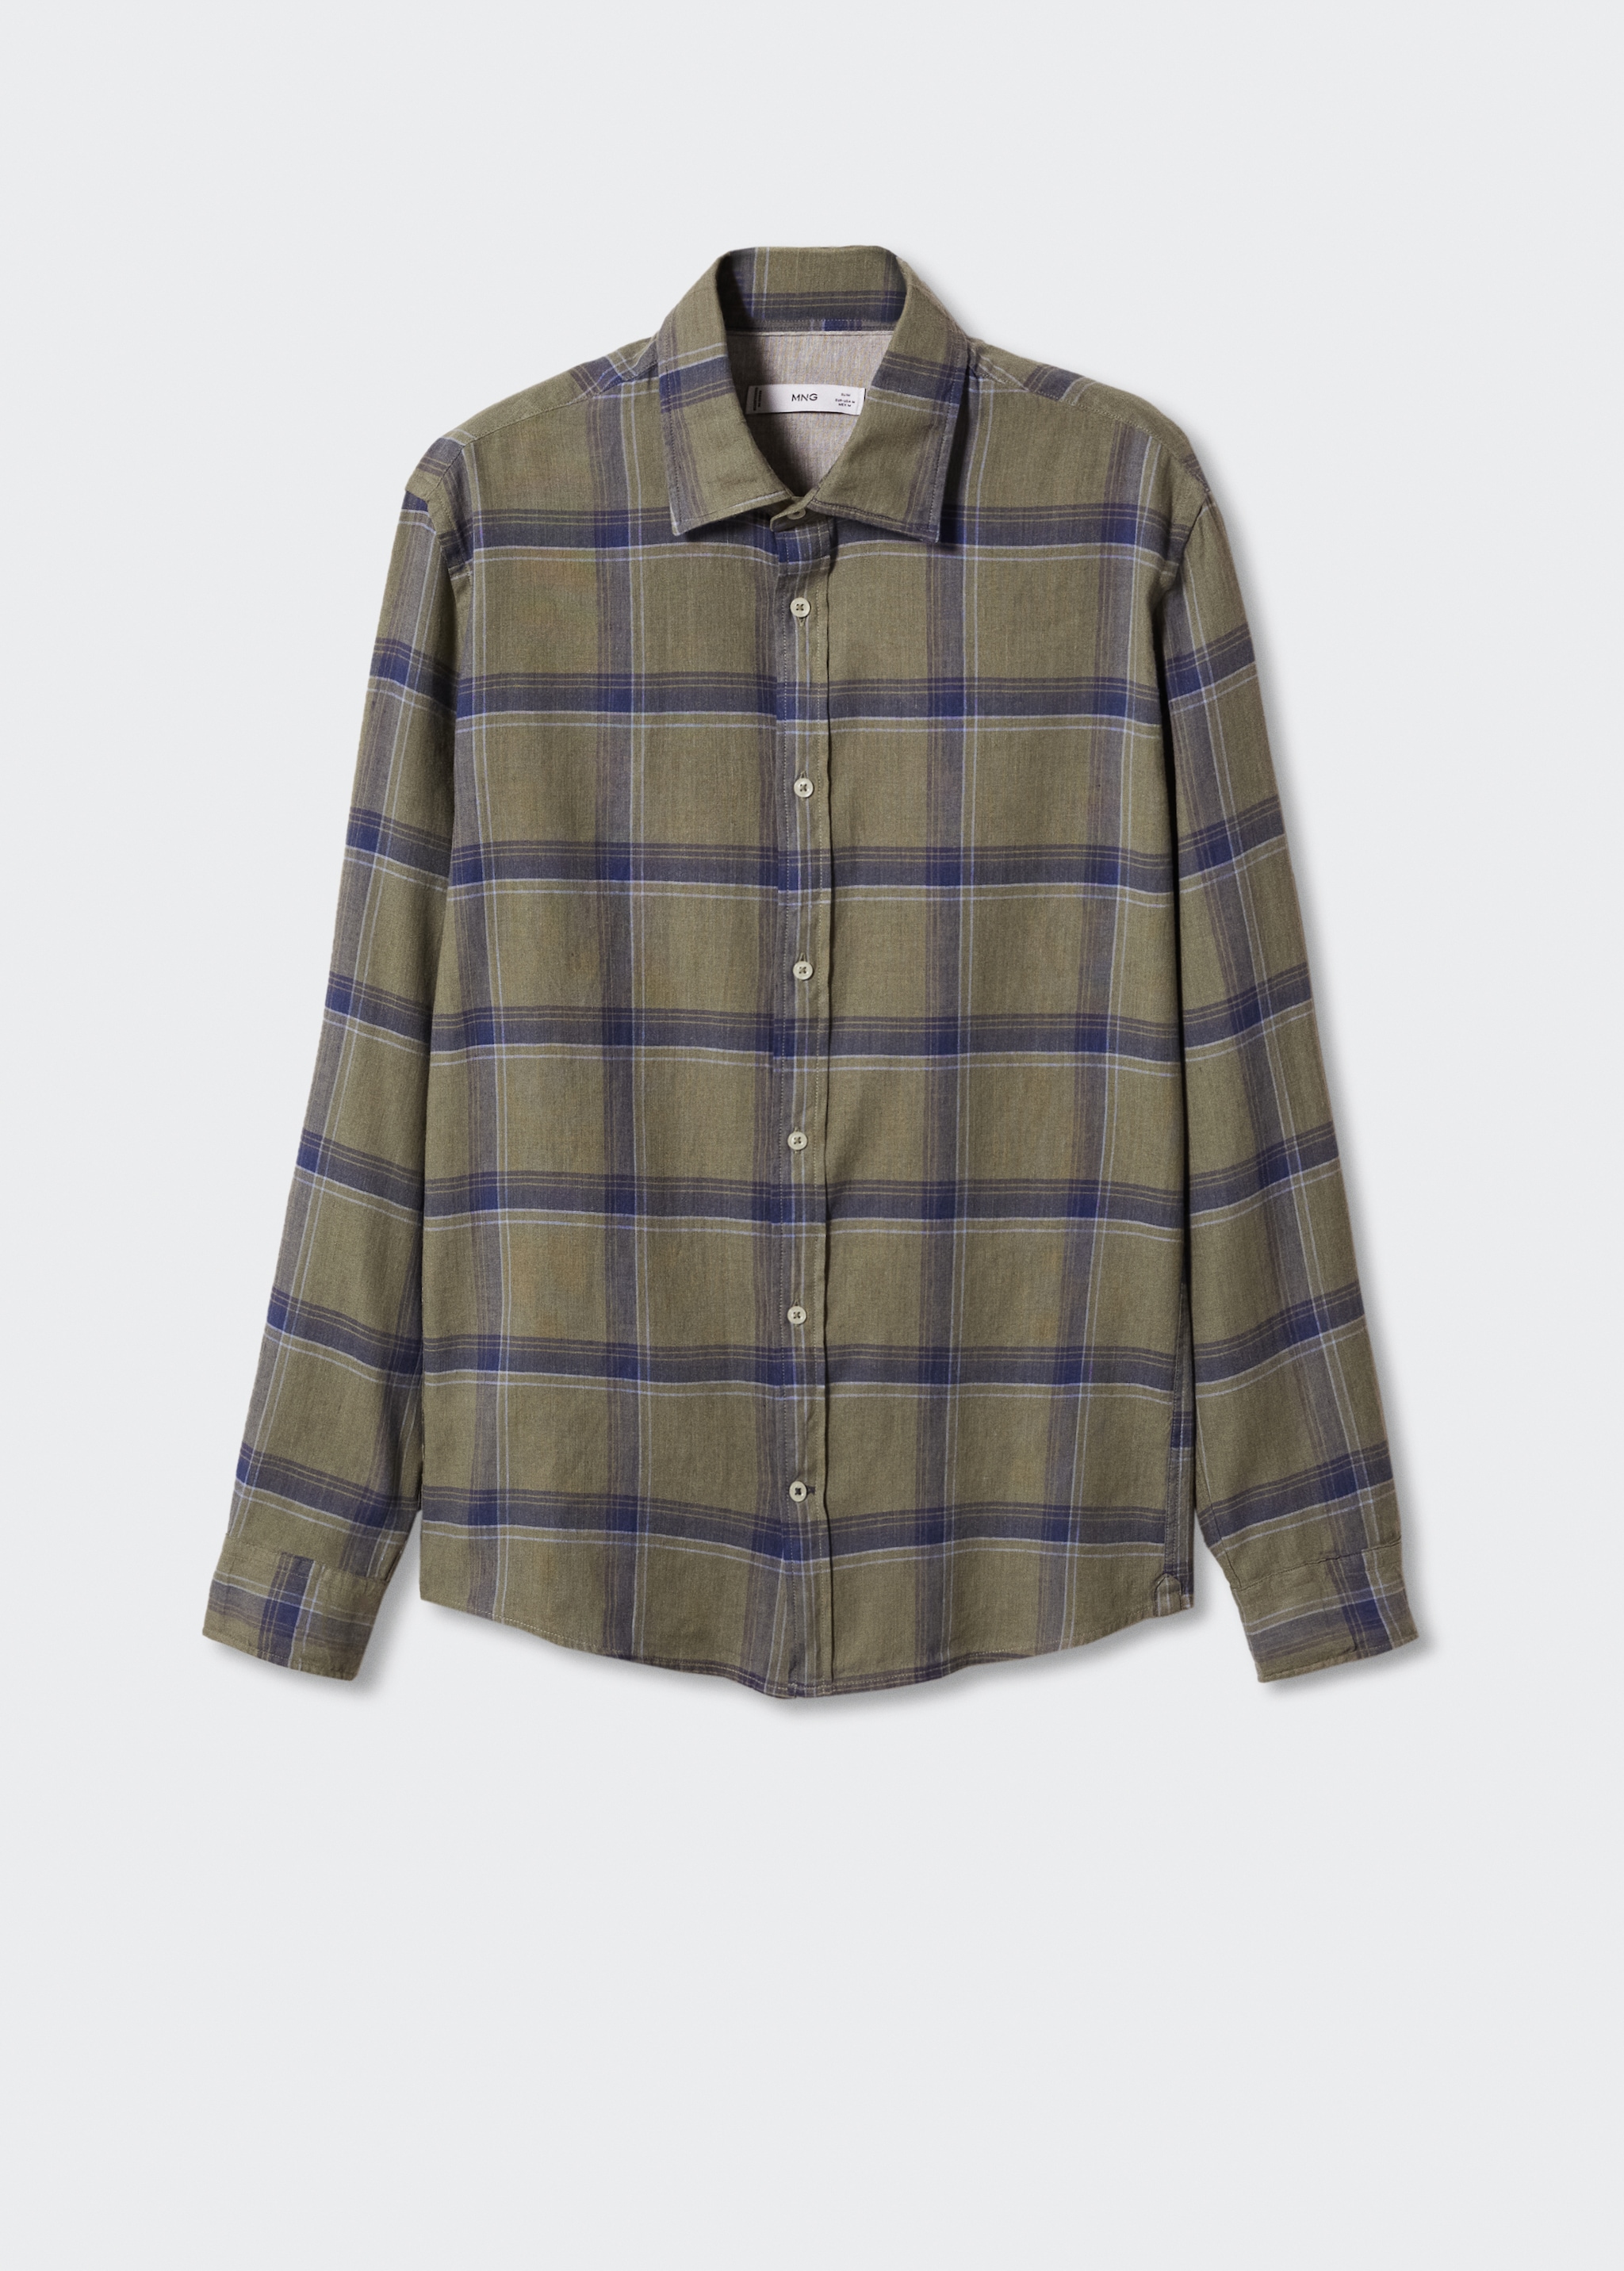 100% linen check shirt - Article without model